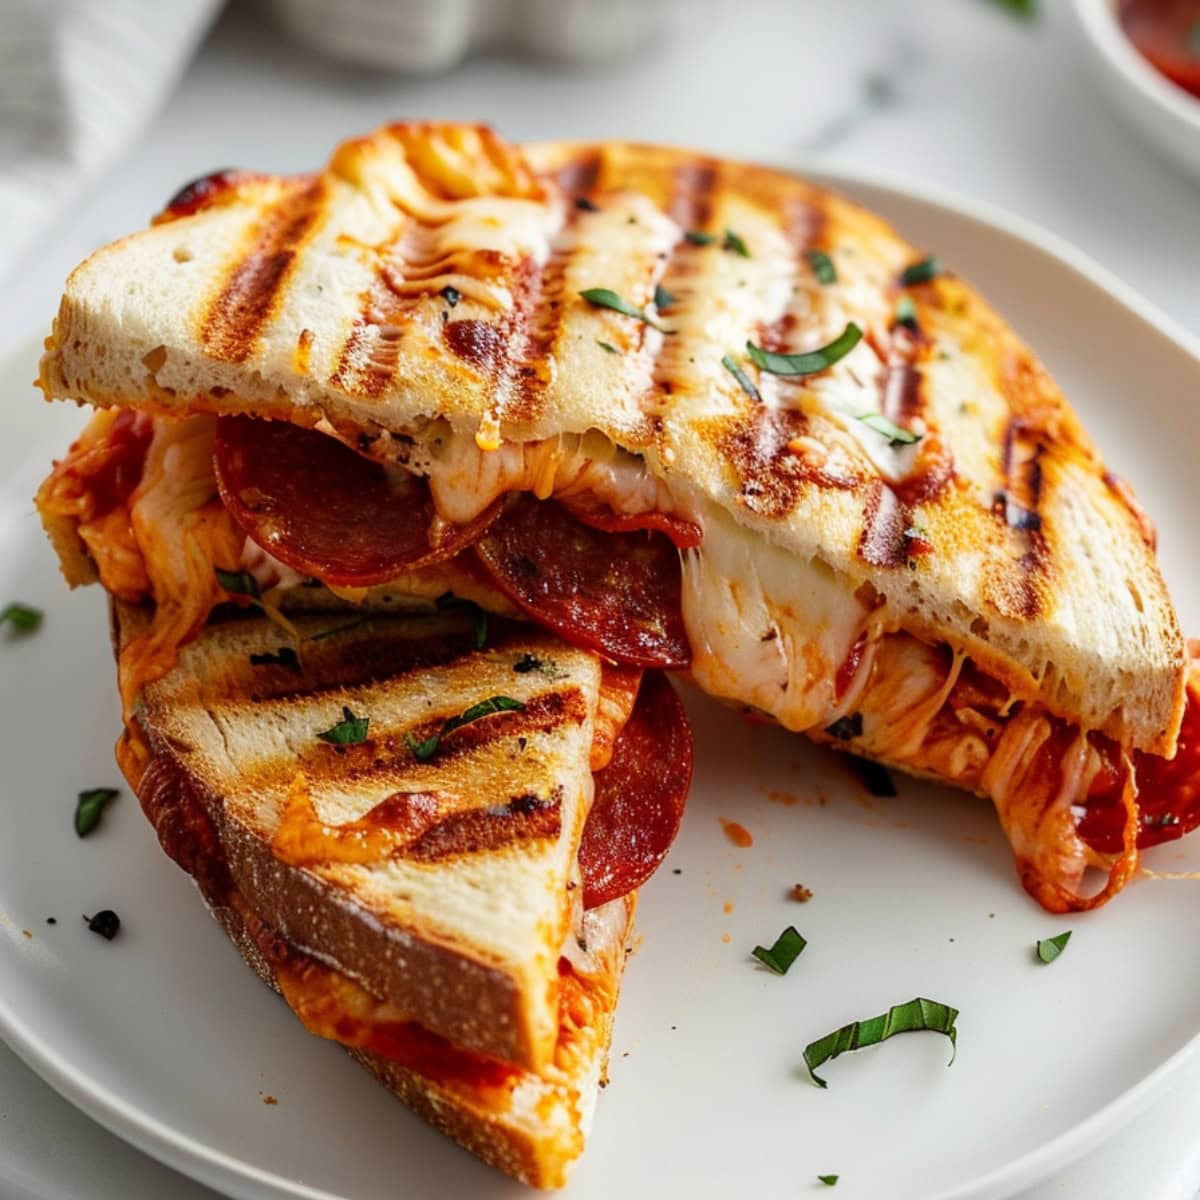 Ciabatta bread grilled with pizza sauce filling, gooey cheese and pepperoni.